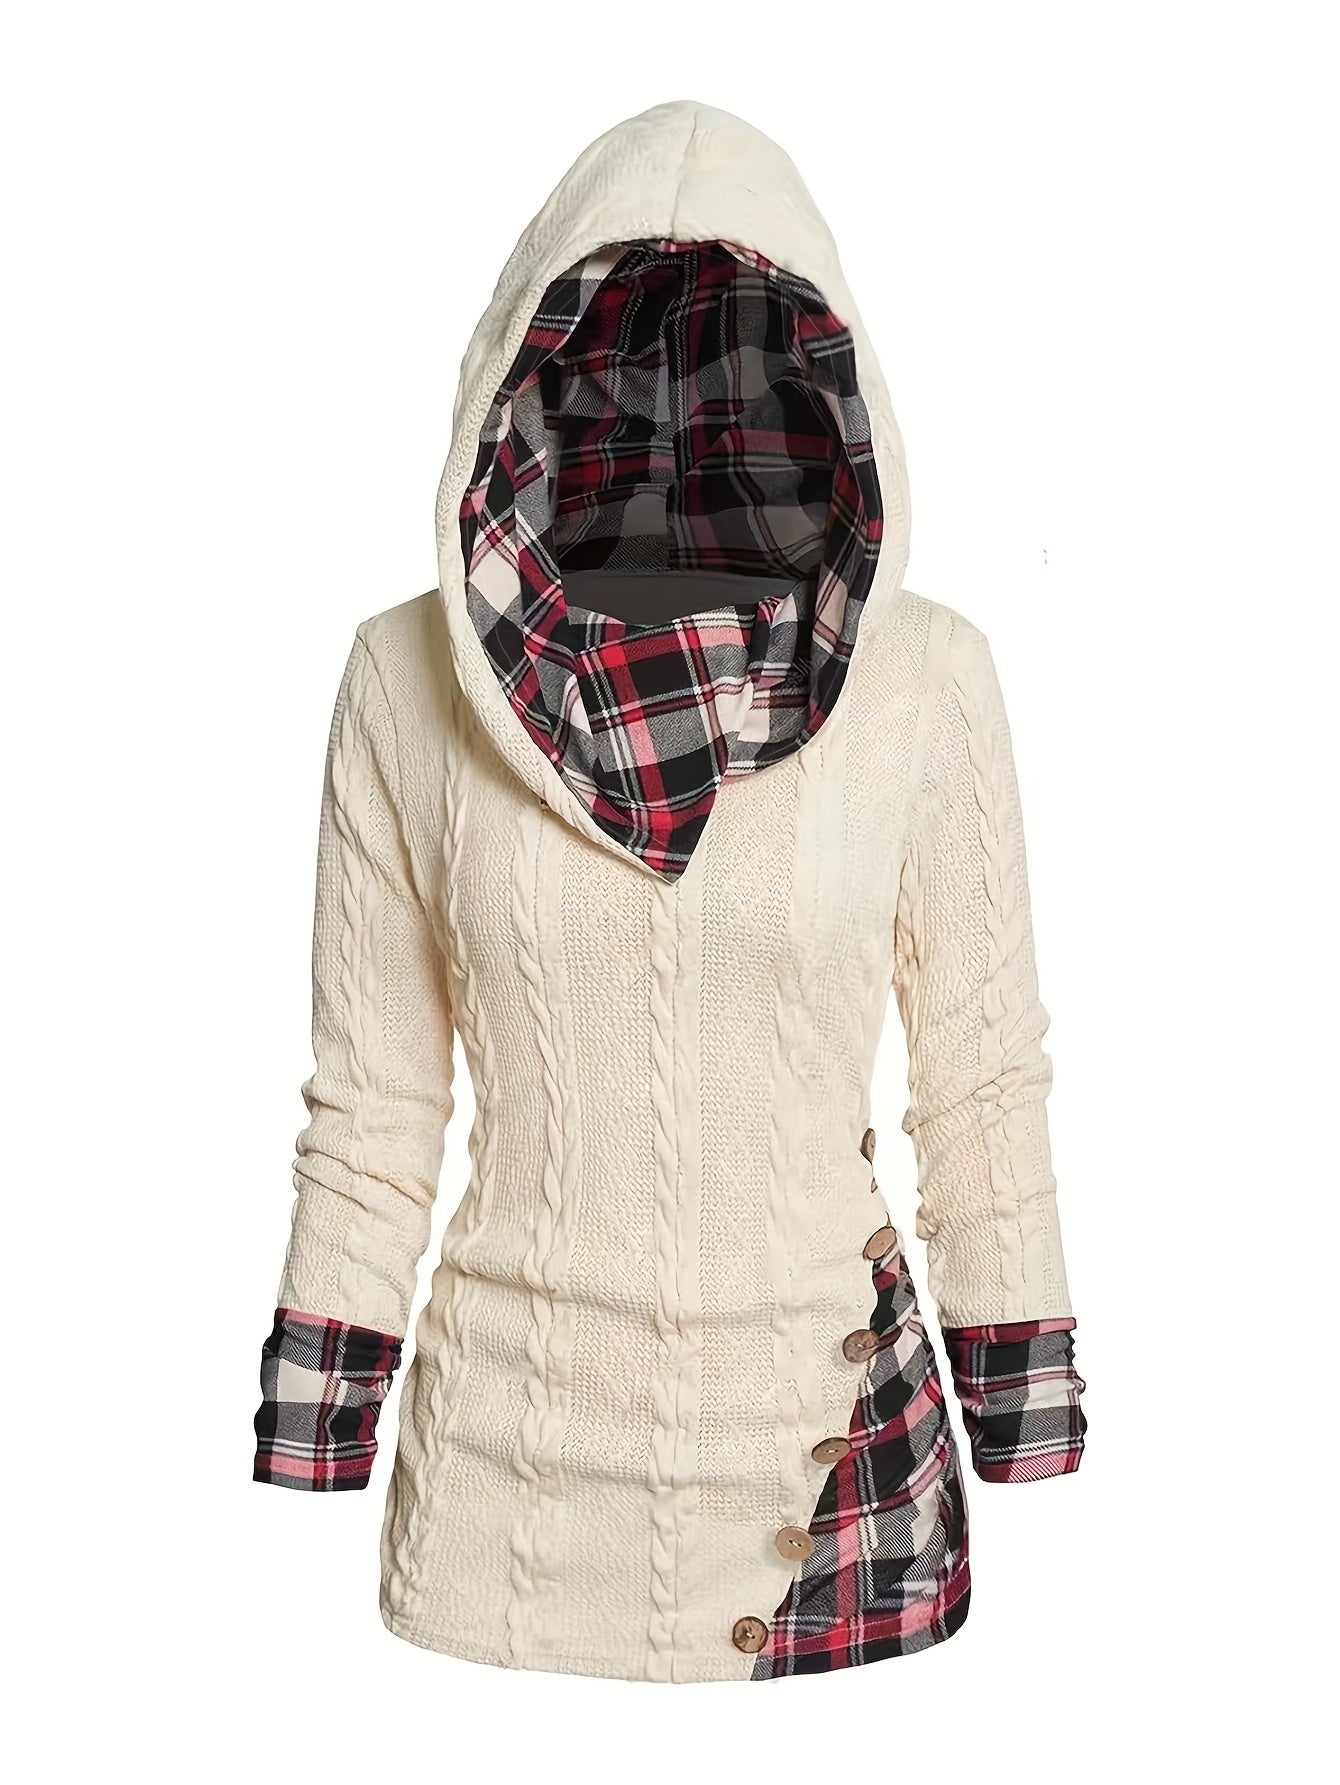 Maramalive™ Plus Size Casual Top, Women's Plus Colorblock Plaid Print Cable Button Decor Long Sleeve Hoodie with a plaid-lined hood, gingham pattern accents on cuffs and side, and button detail along the side. This casual style piece is crafted from cozy polyester for added comfort.